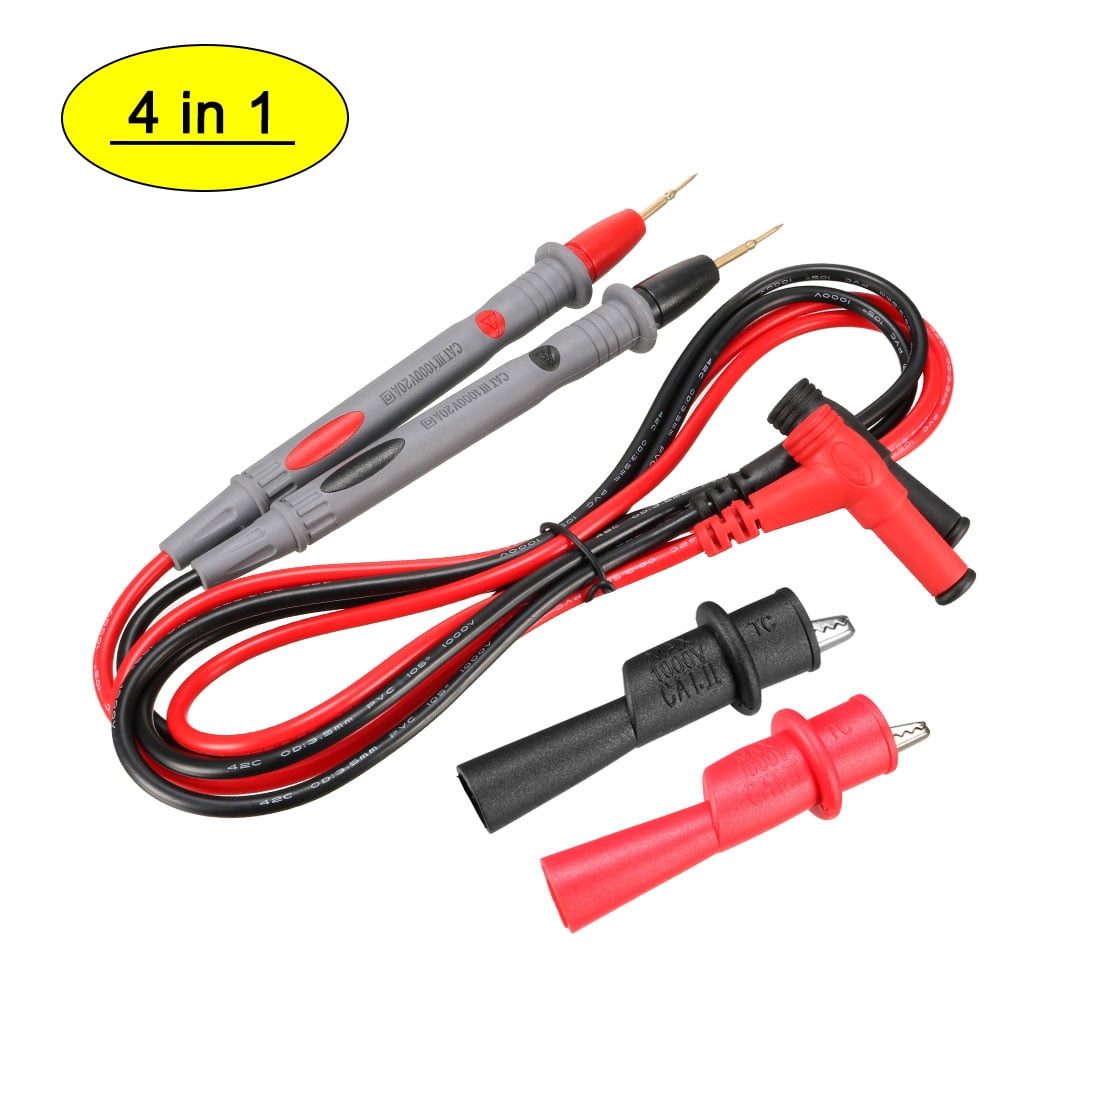 Hot 1 Pair Banana Plug To Test Hook Clip Probe Lead Cable For Multimeter XS 